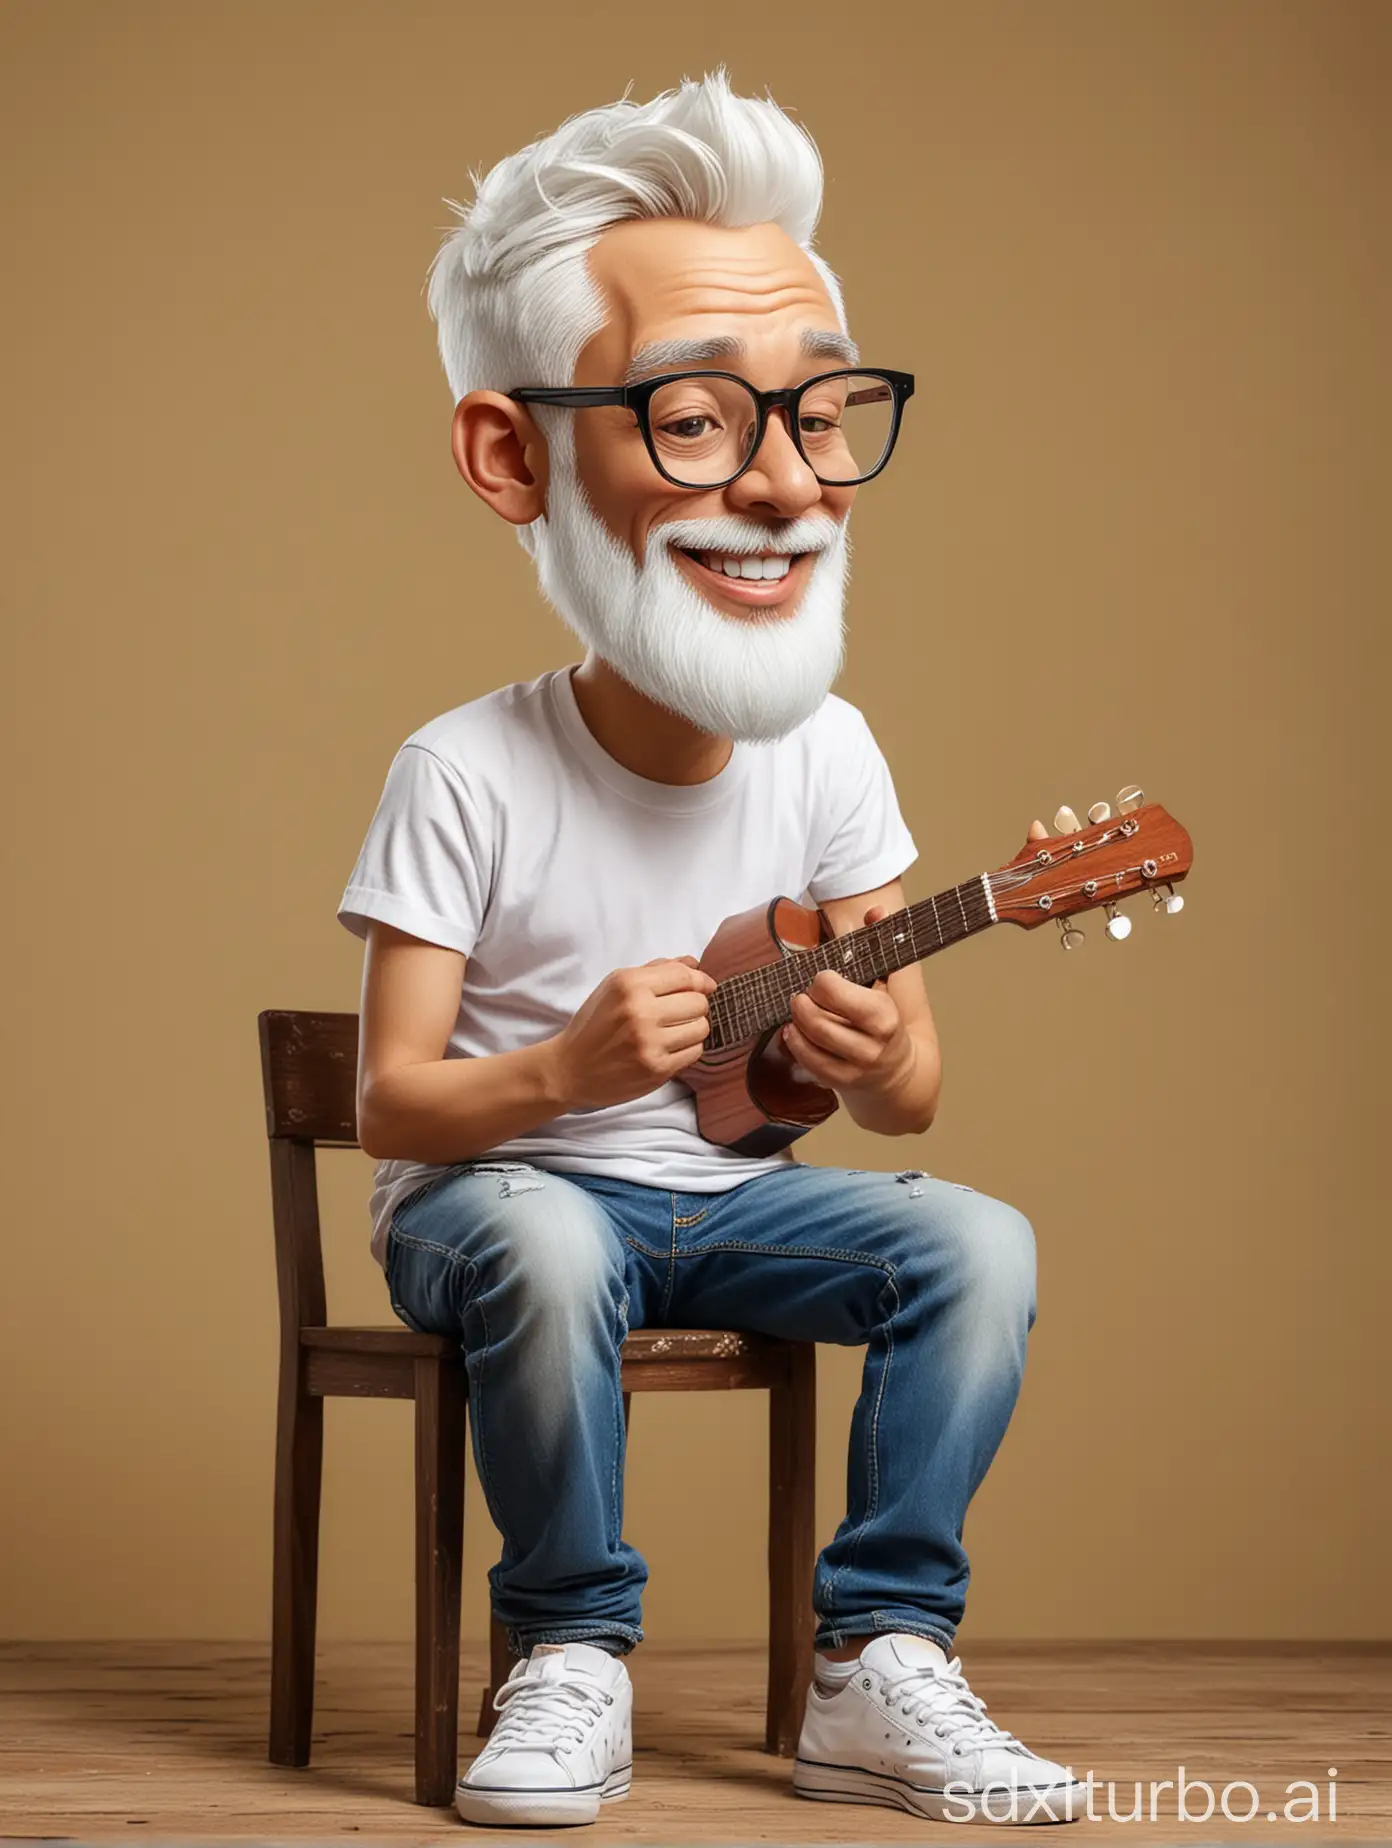 Elderly-Indonesian-Man-Playing-Classical-Guitar-on-Wooden-Chair